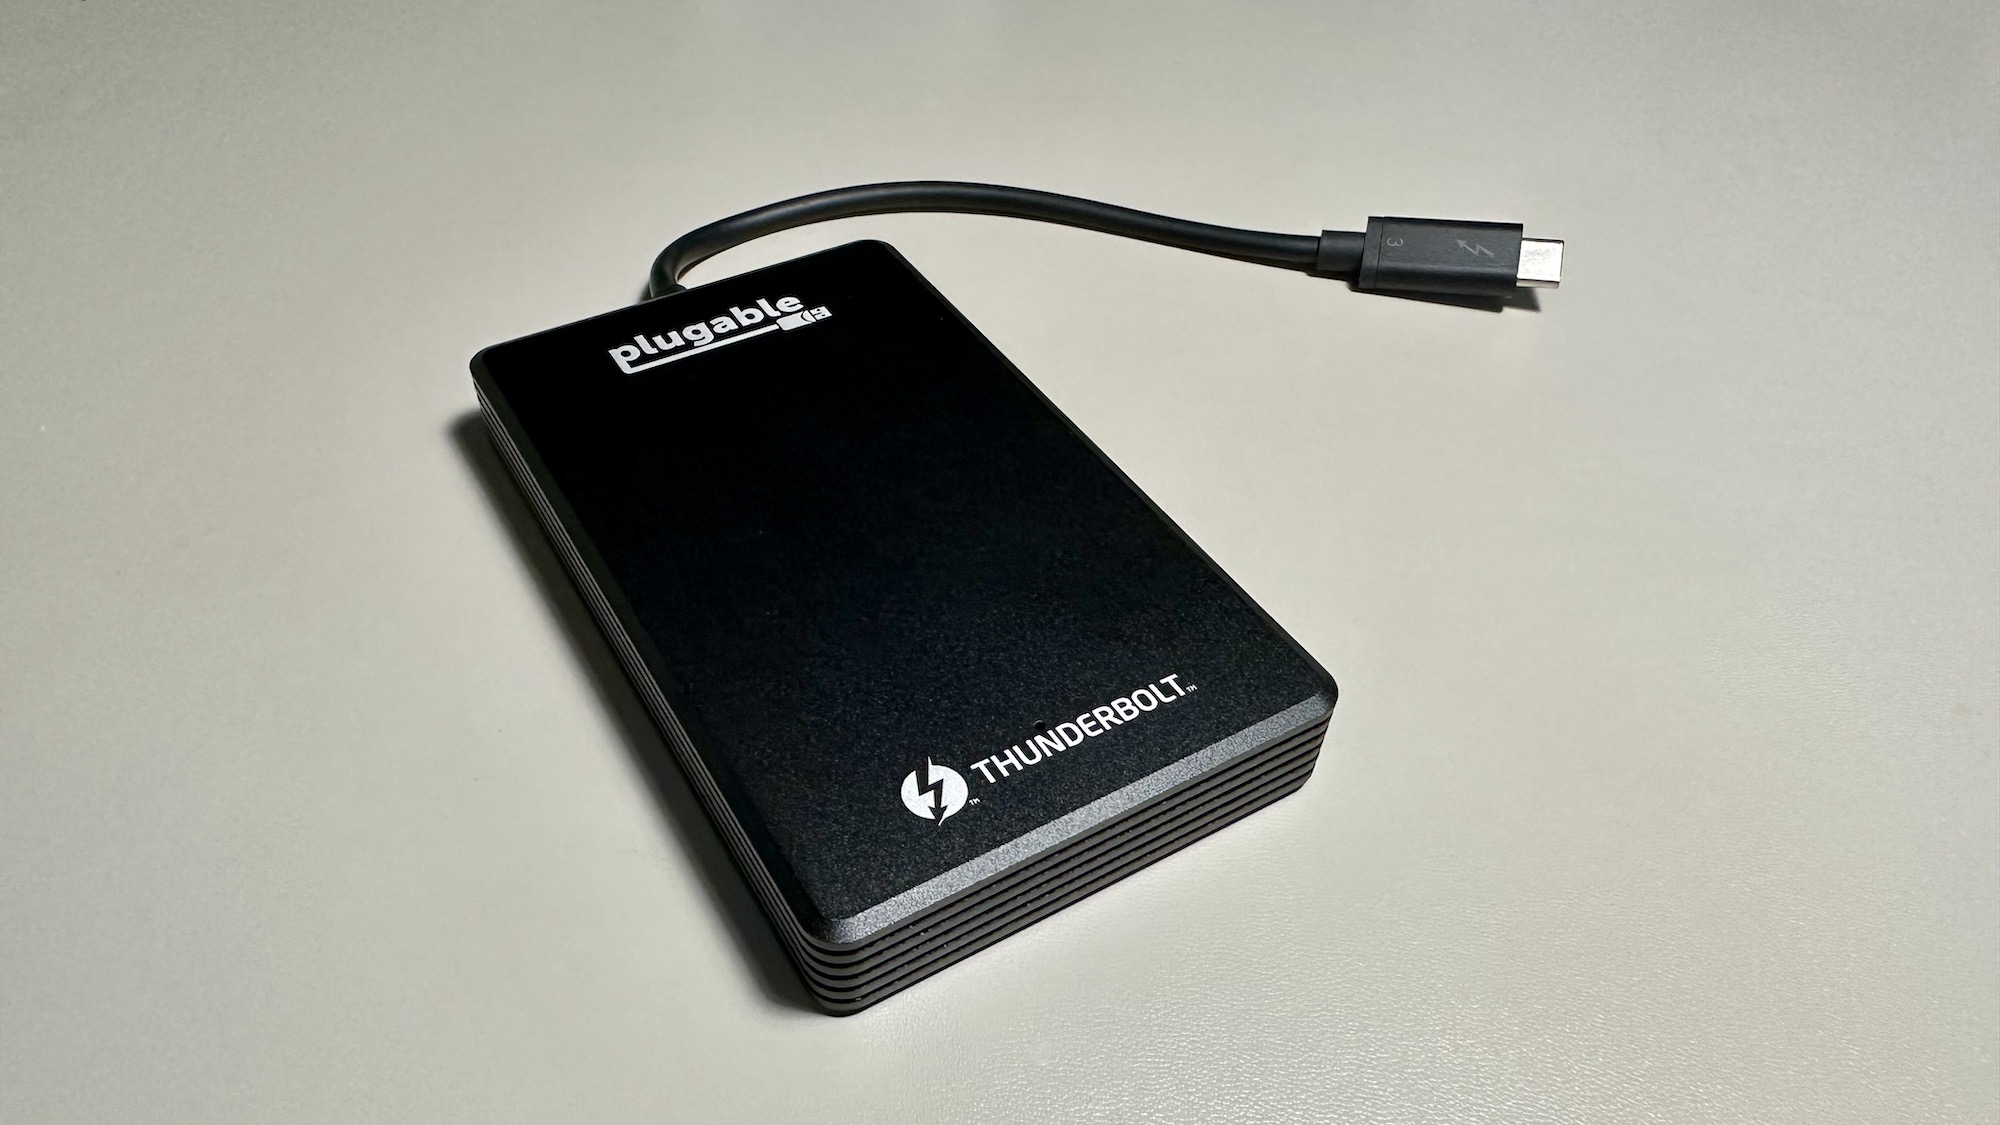 Review: Plugable’s 2TB Thunderbolt SSD Offers Ultra Fast Transfer Speeds